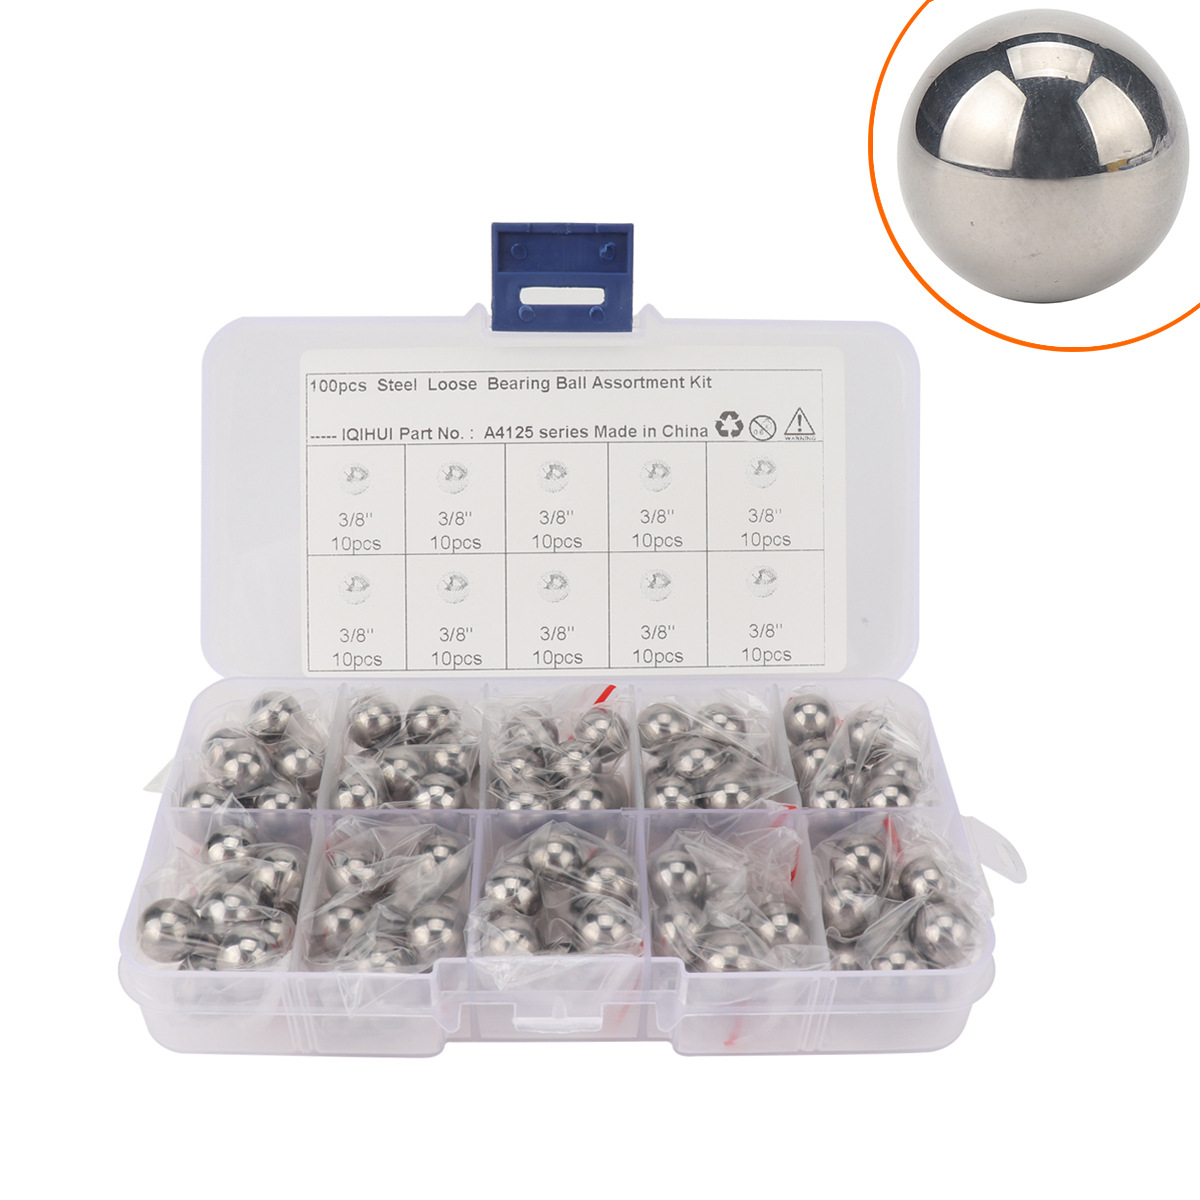  boxed motorcycles and bicycles high-precision G25 bearing steel balls 3/8 "solid steel balls 100 only